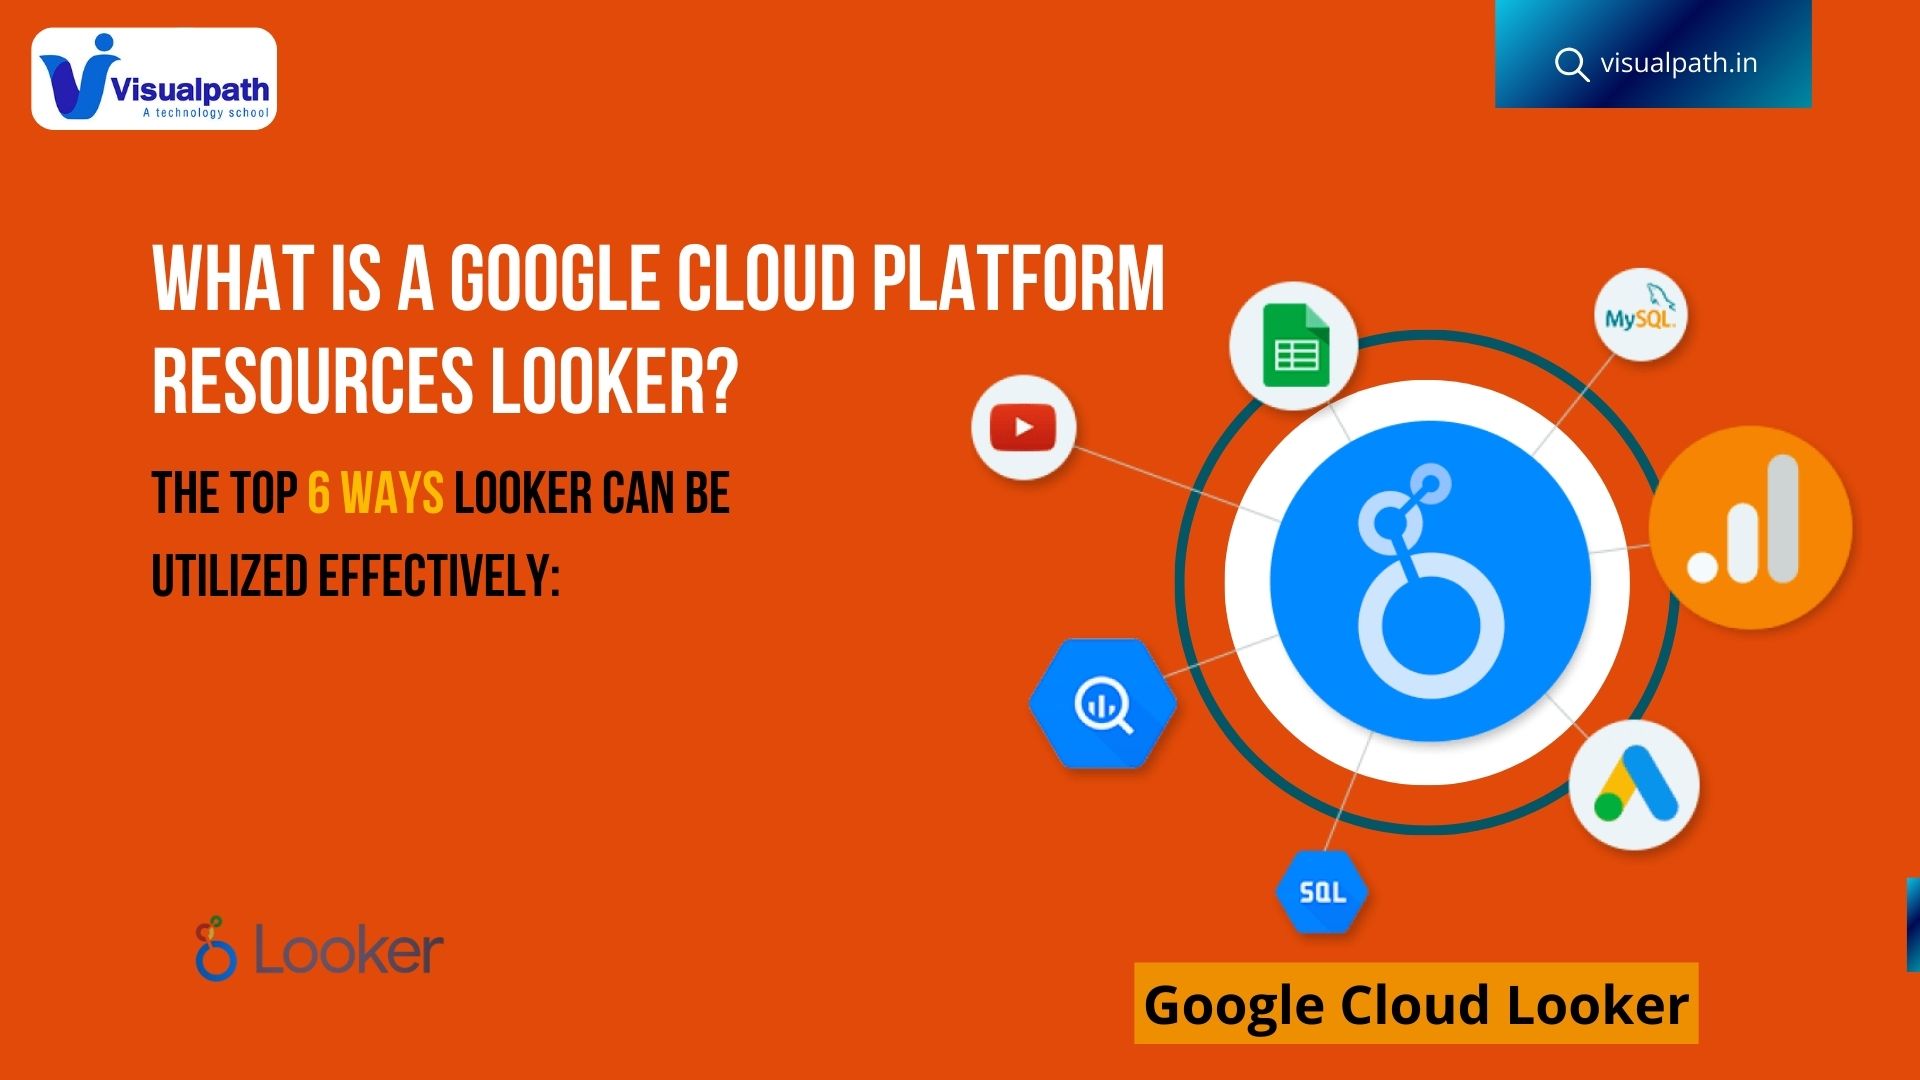 What is a Google Cloud Platform Resources Looker?